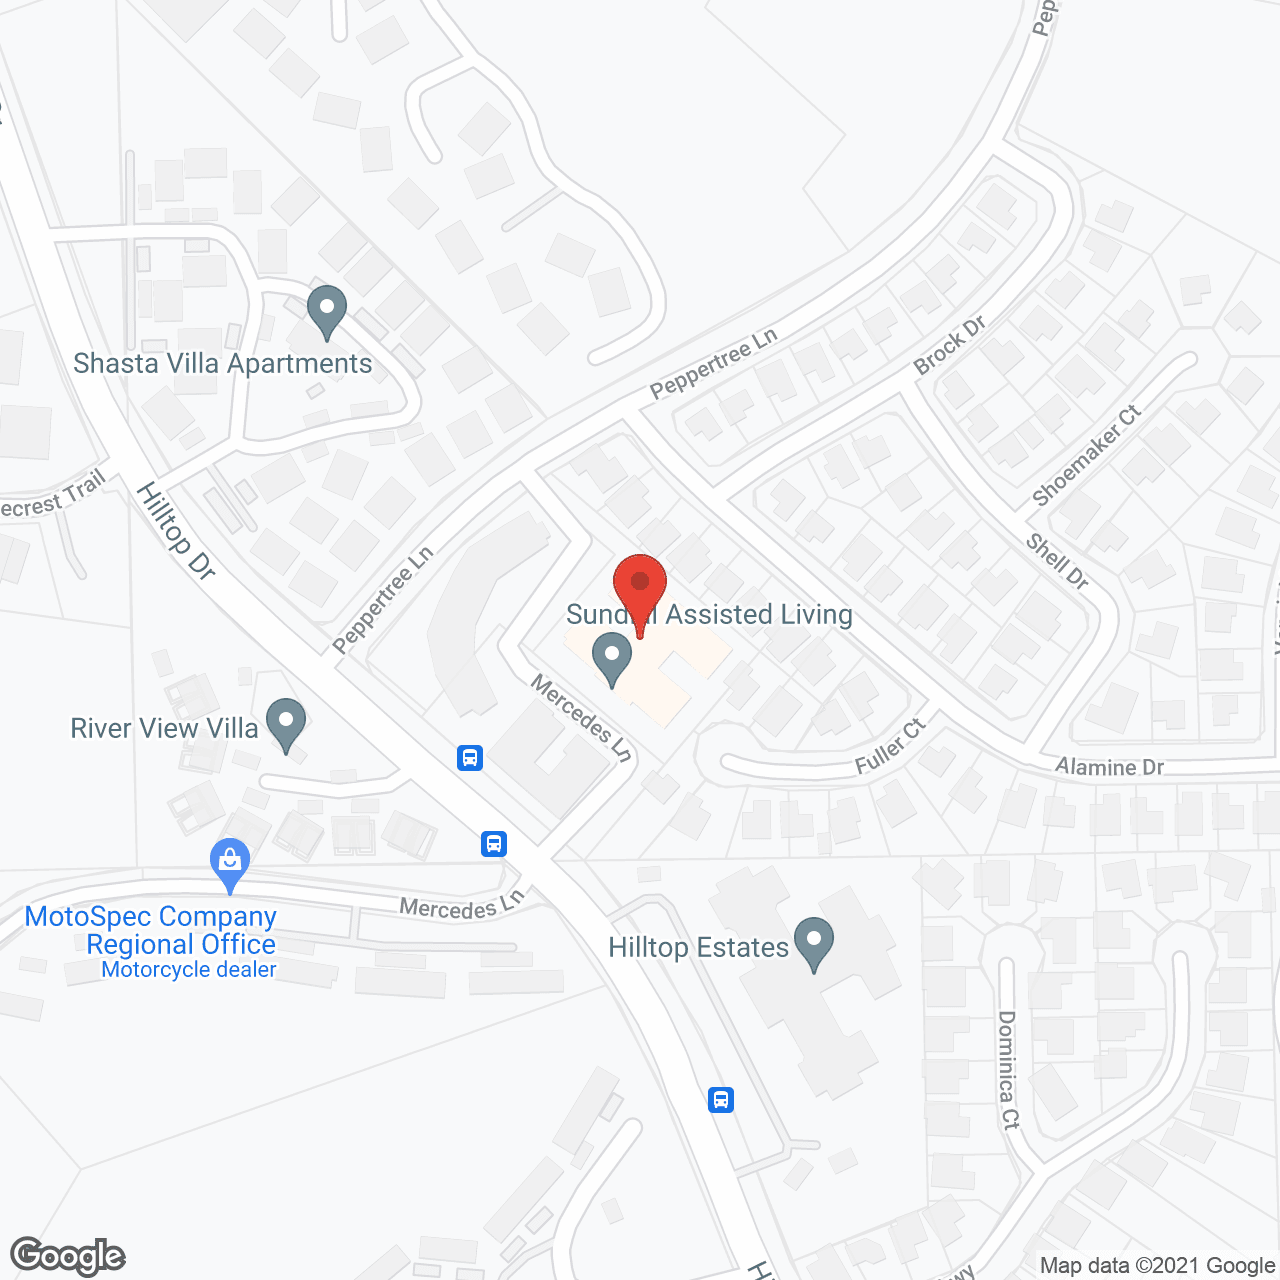 Sundial Assisted Living in google map